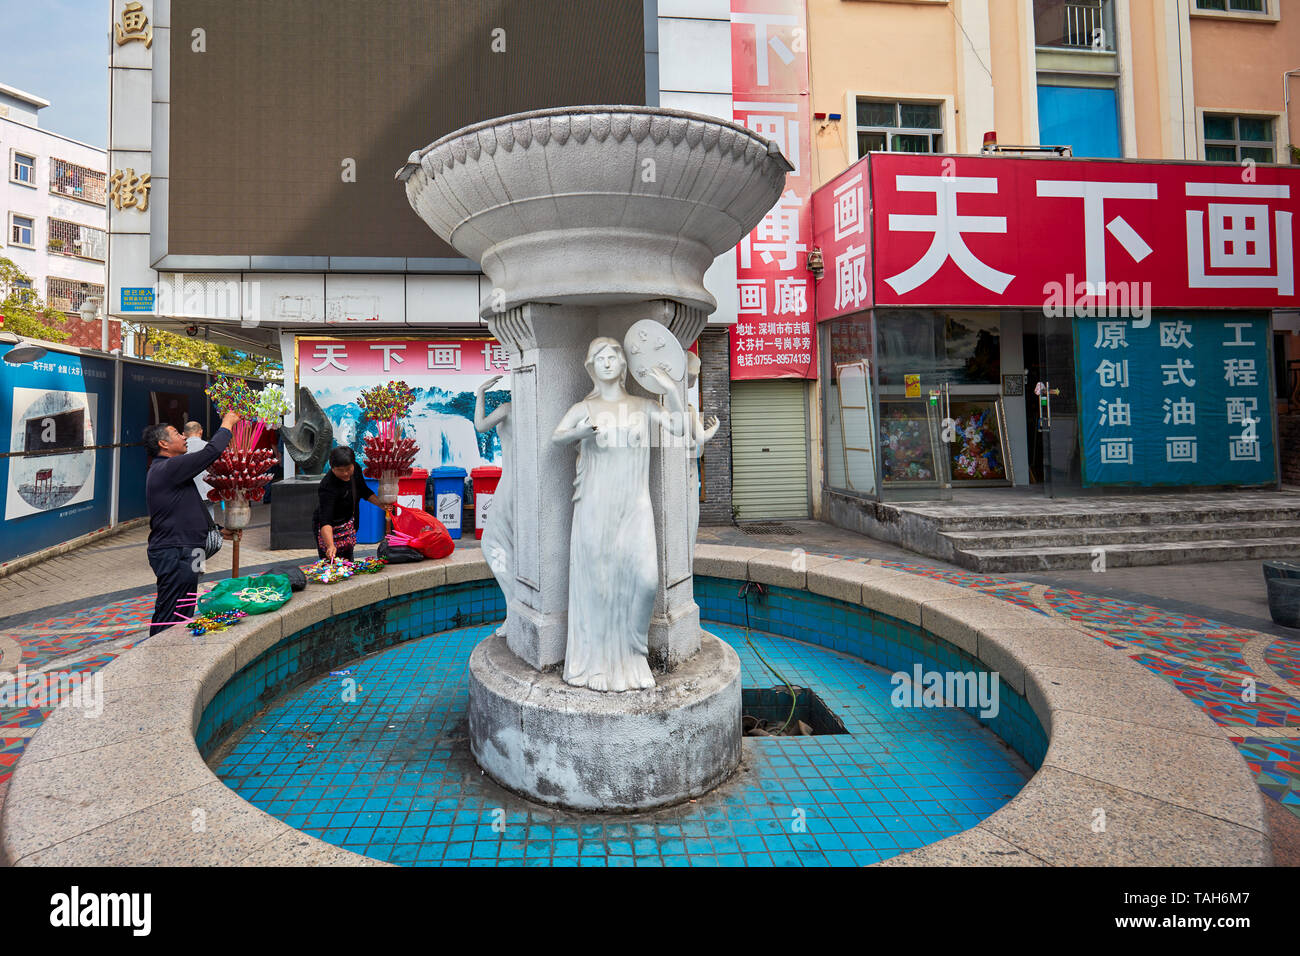 Fountain sculpture in Dafen Oil Painting Village. Shenzhen, Guangdong Province, China. Stock Photo